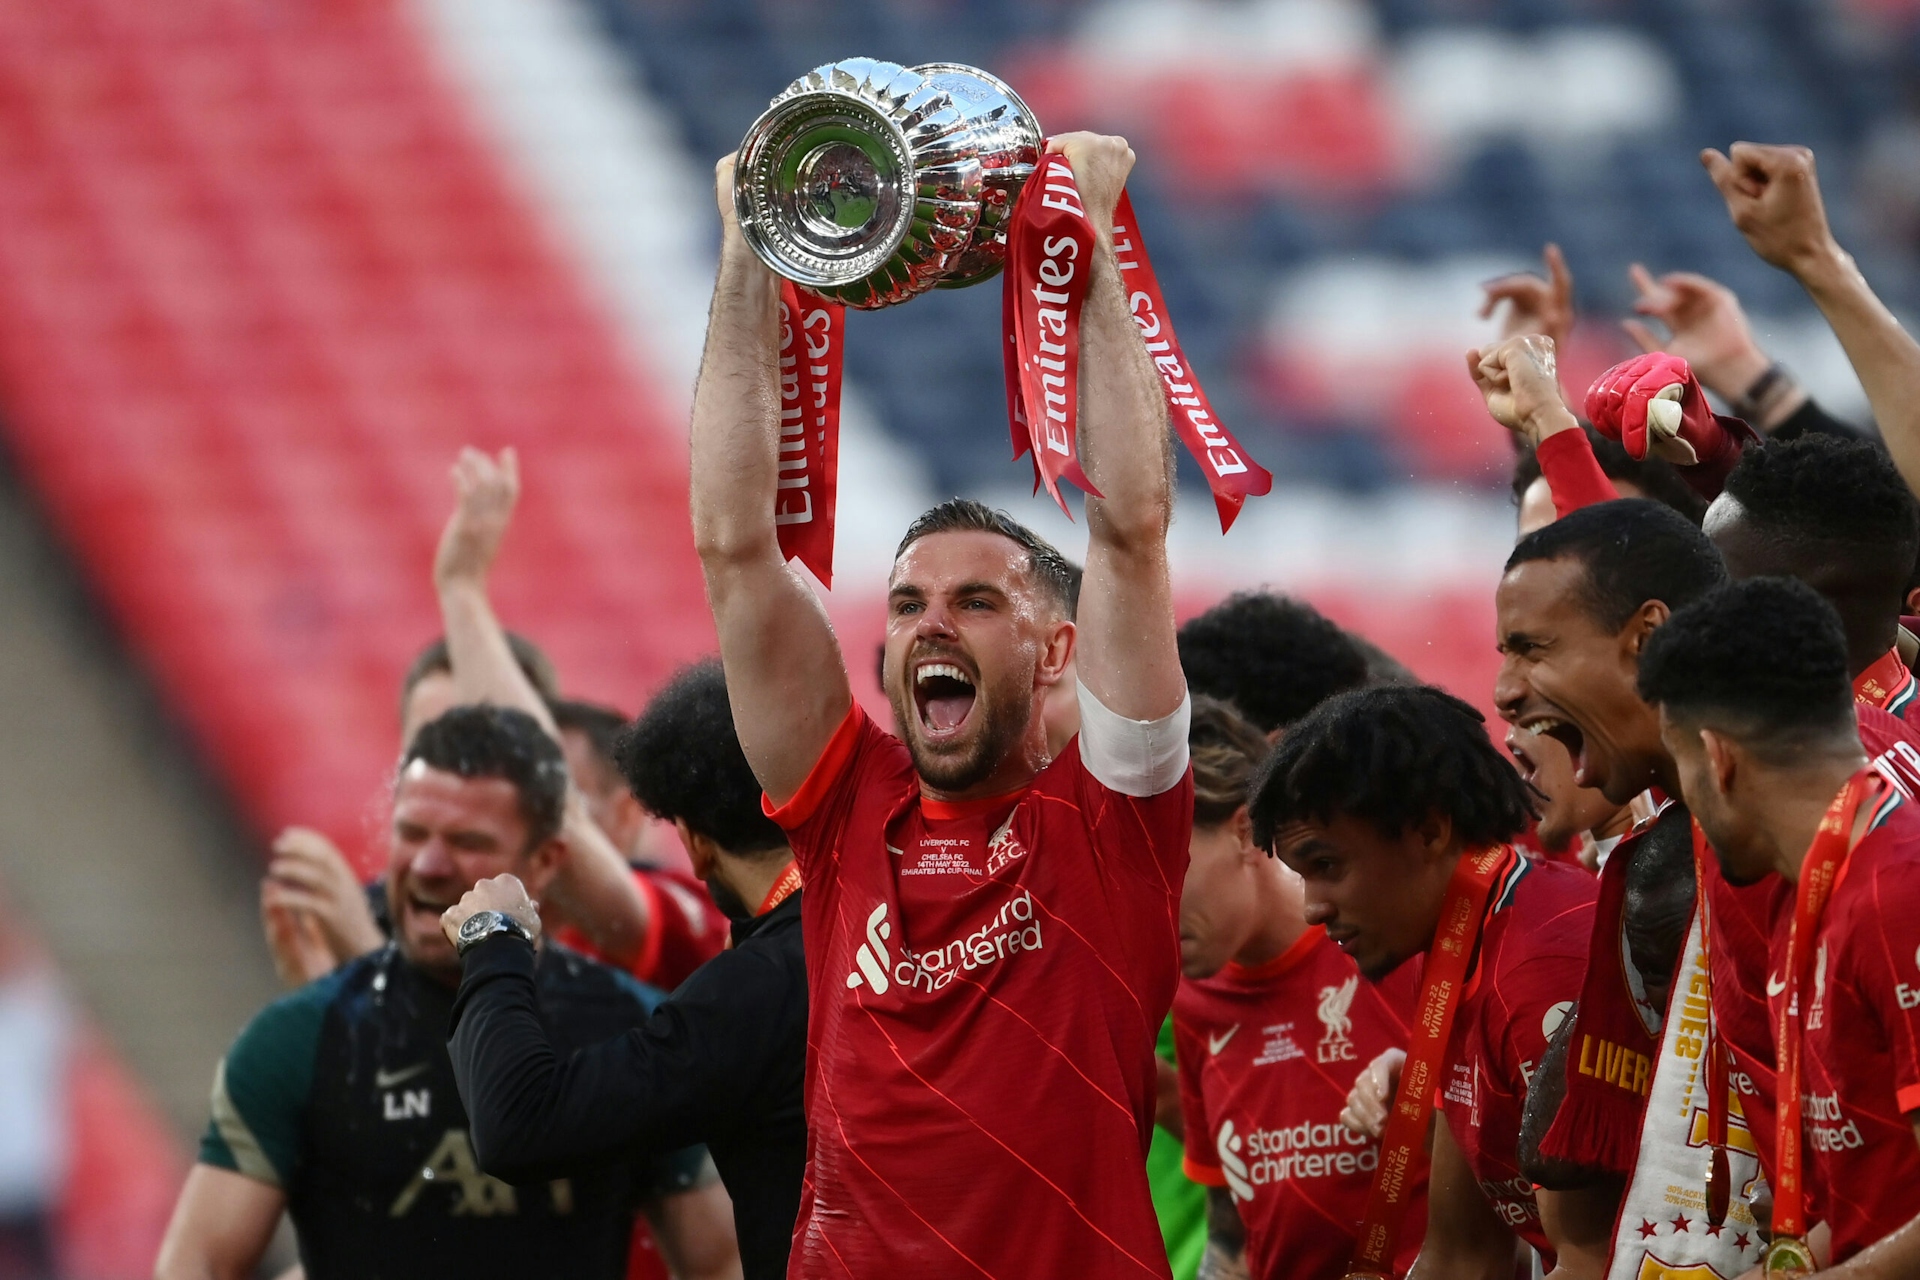 Photograph of Jordan Henderson of Liverpool lifting the Emirates FA Cup trophy at Wembley Stadium